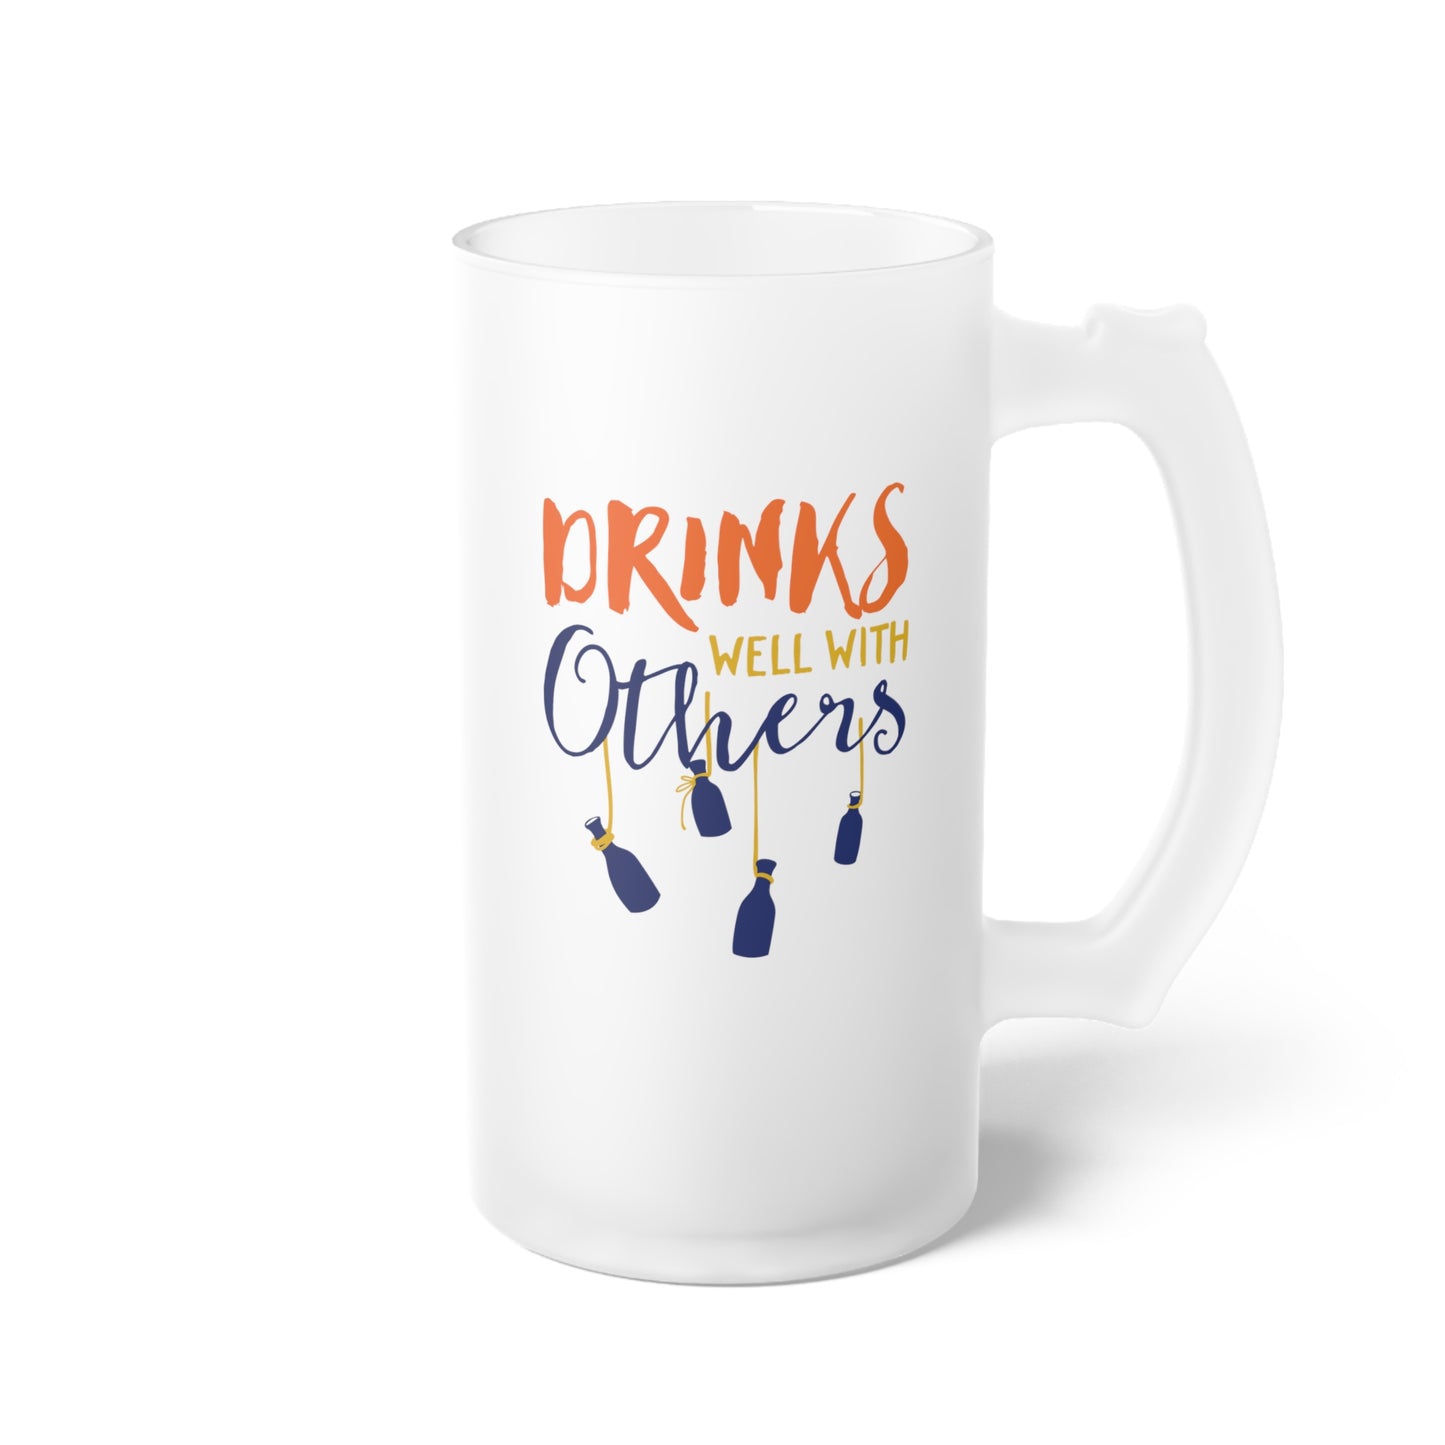 Drinks Well With Others Frosted Glass Beer Mug